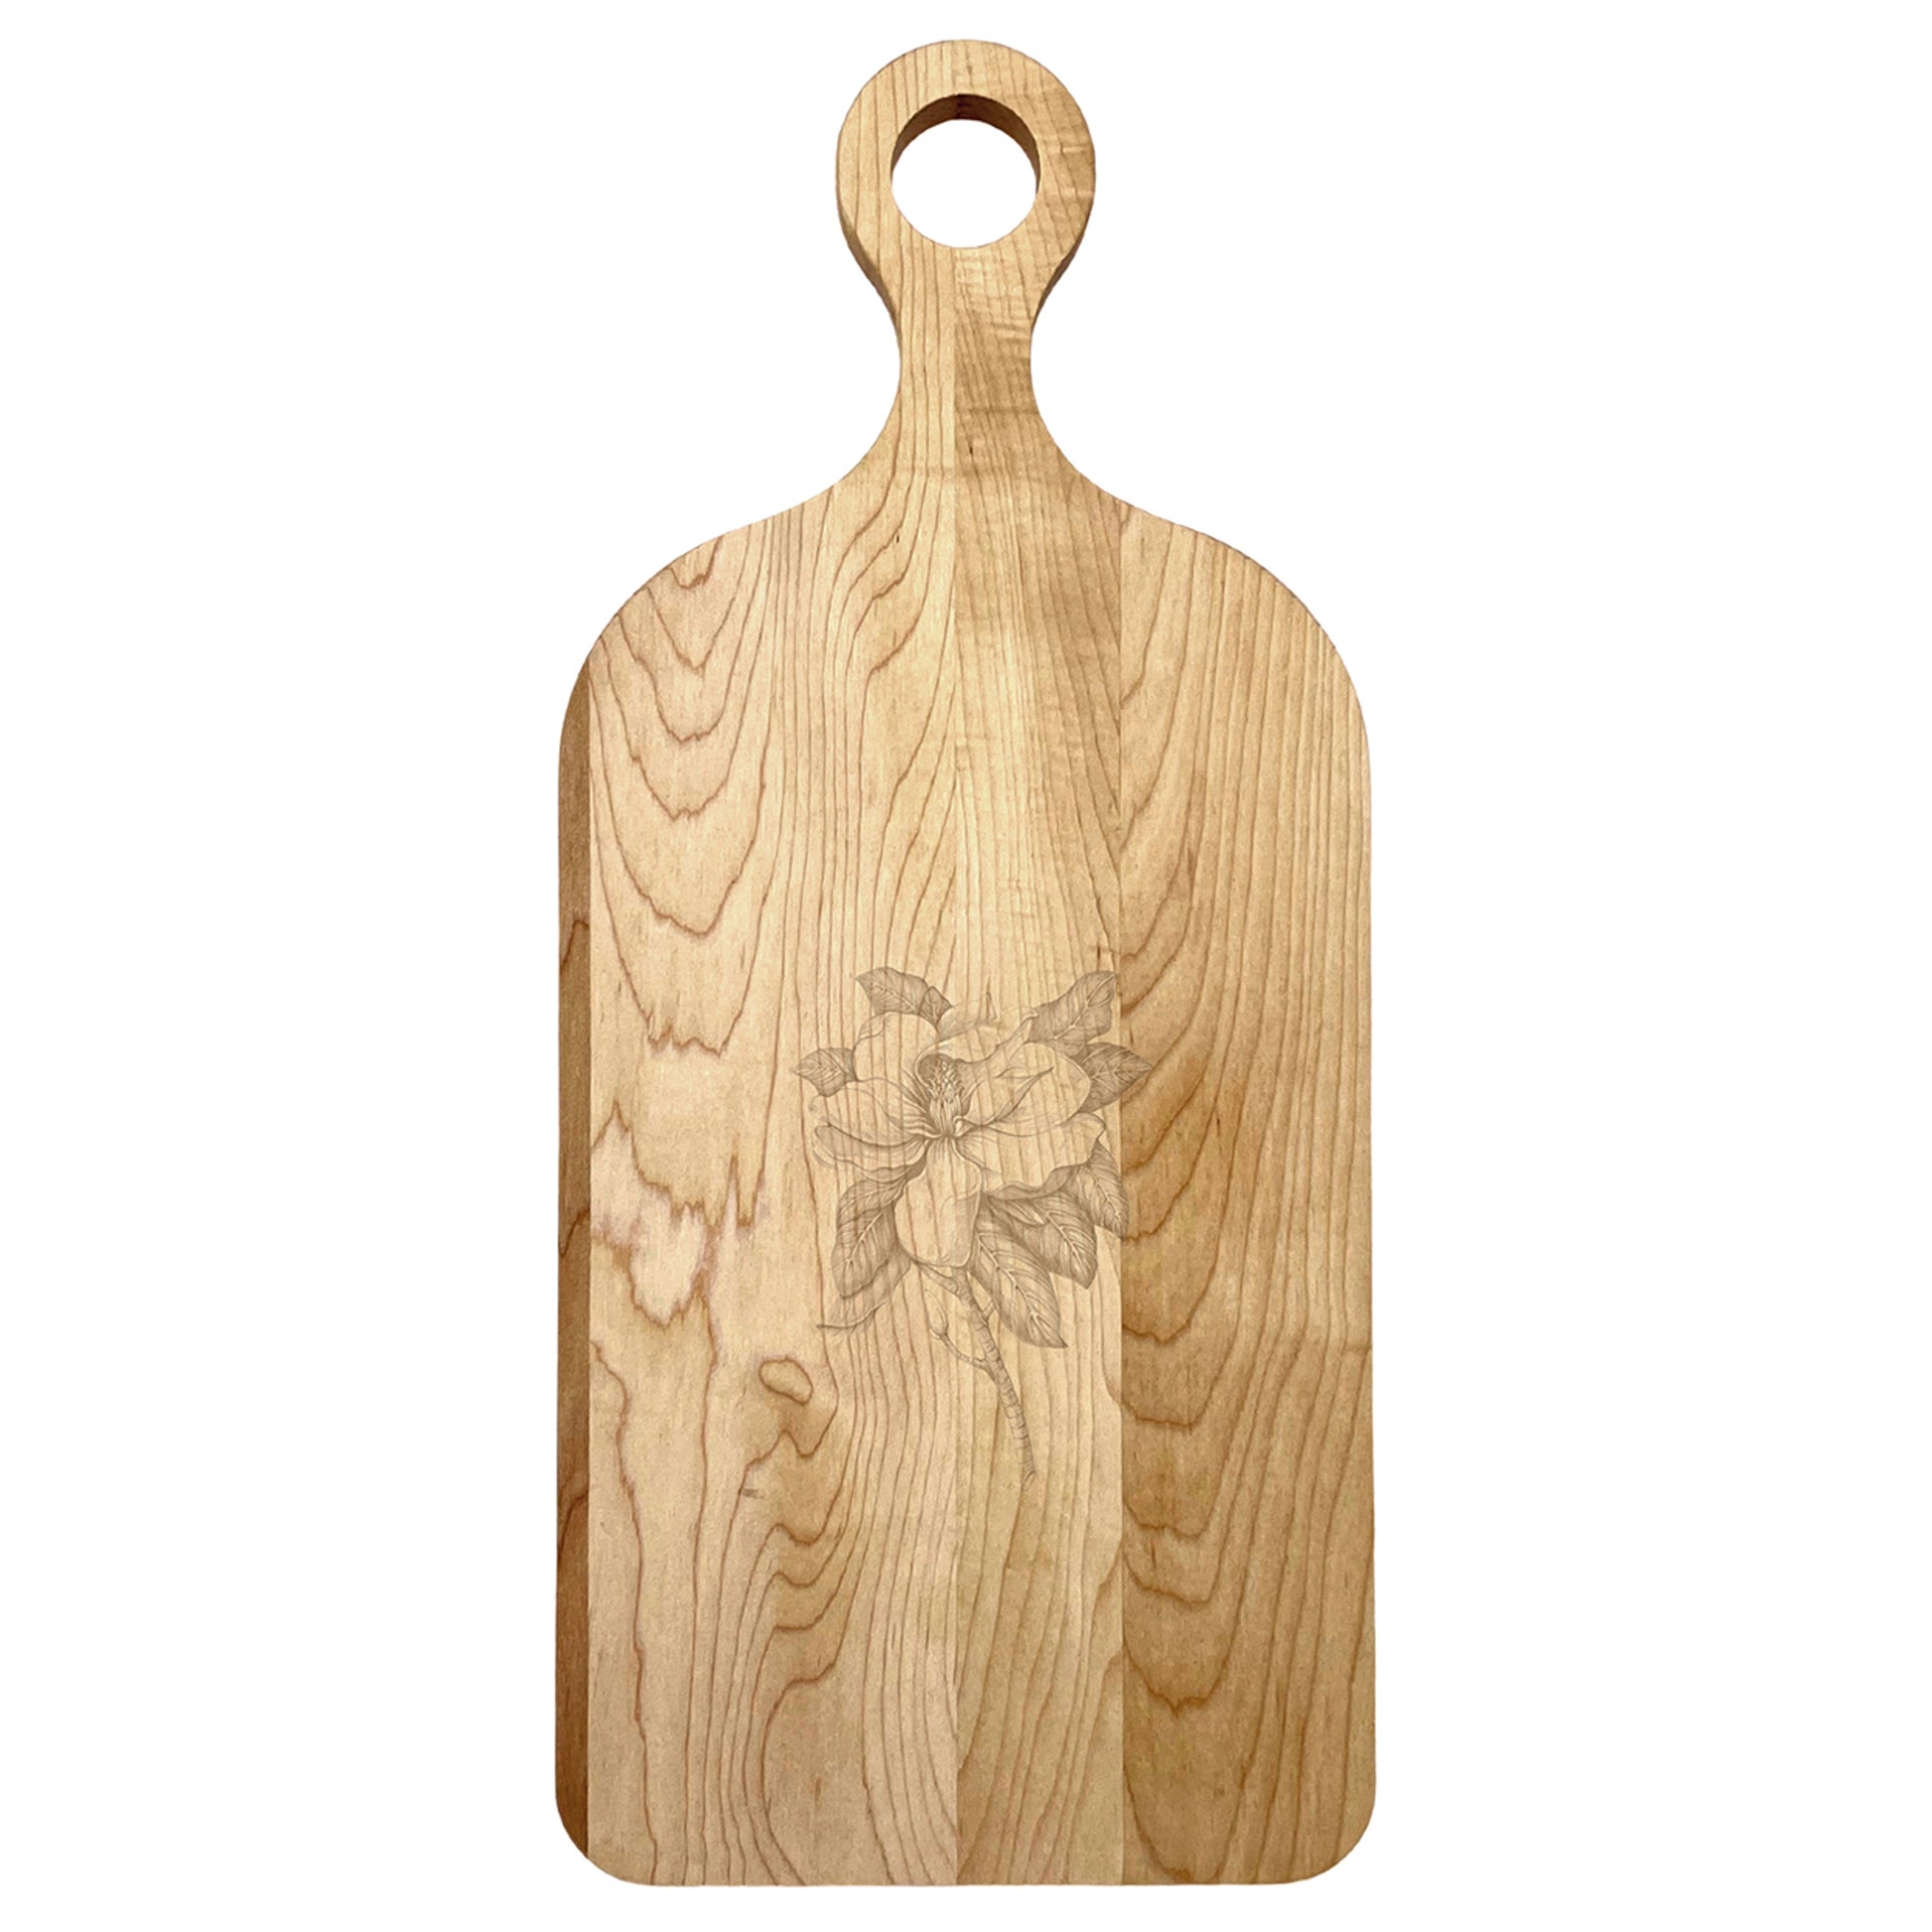 Laura Zindel Large Maple Paddle Serving Board - More designs available